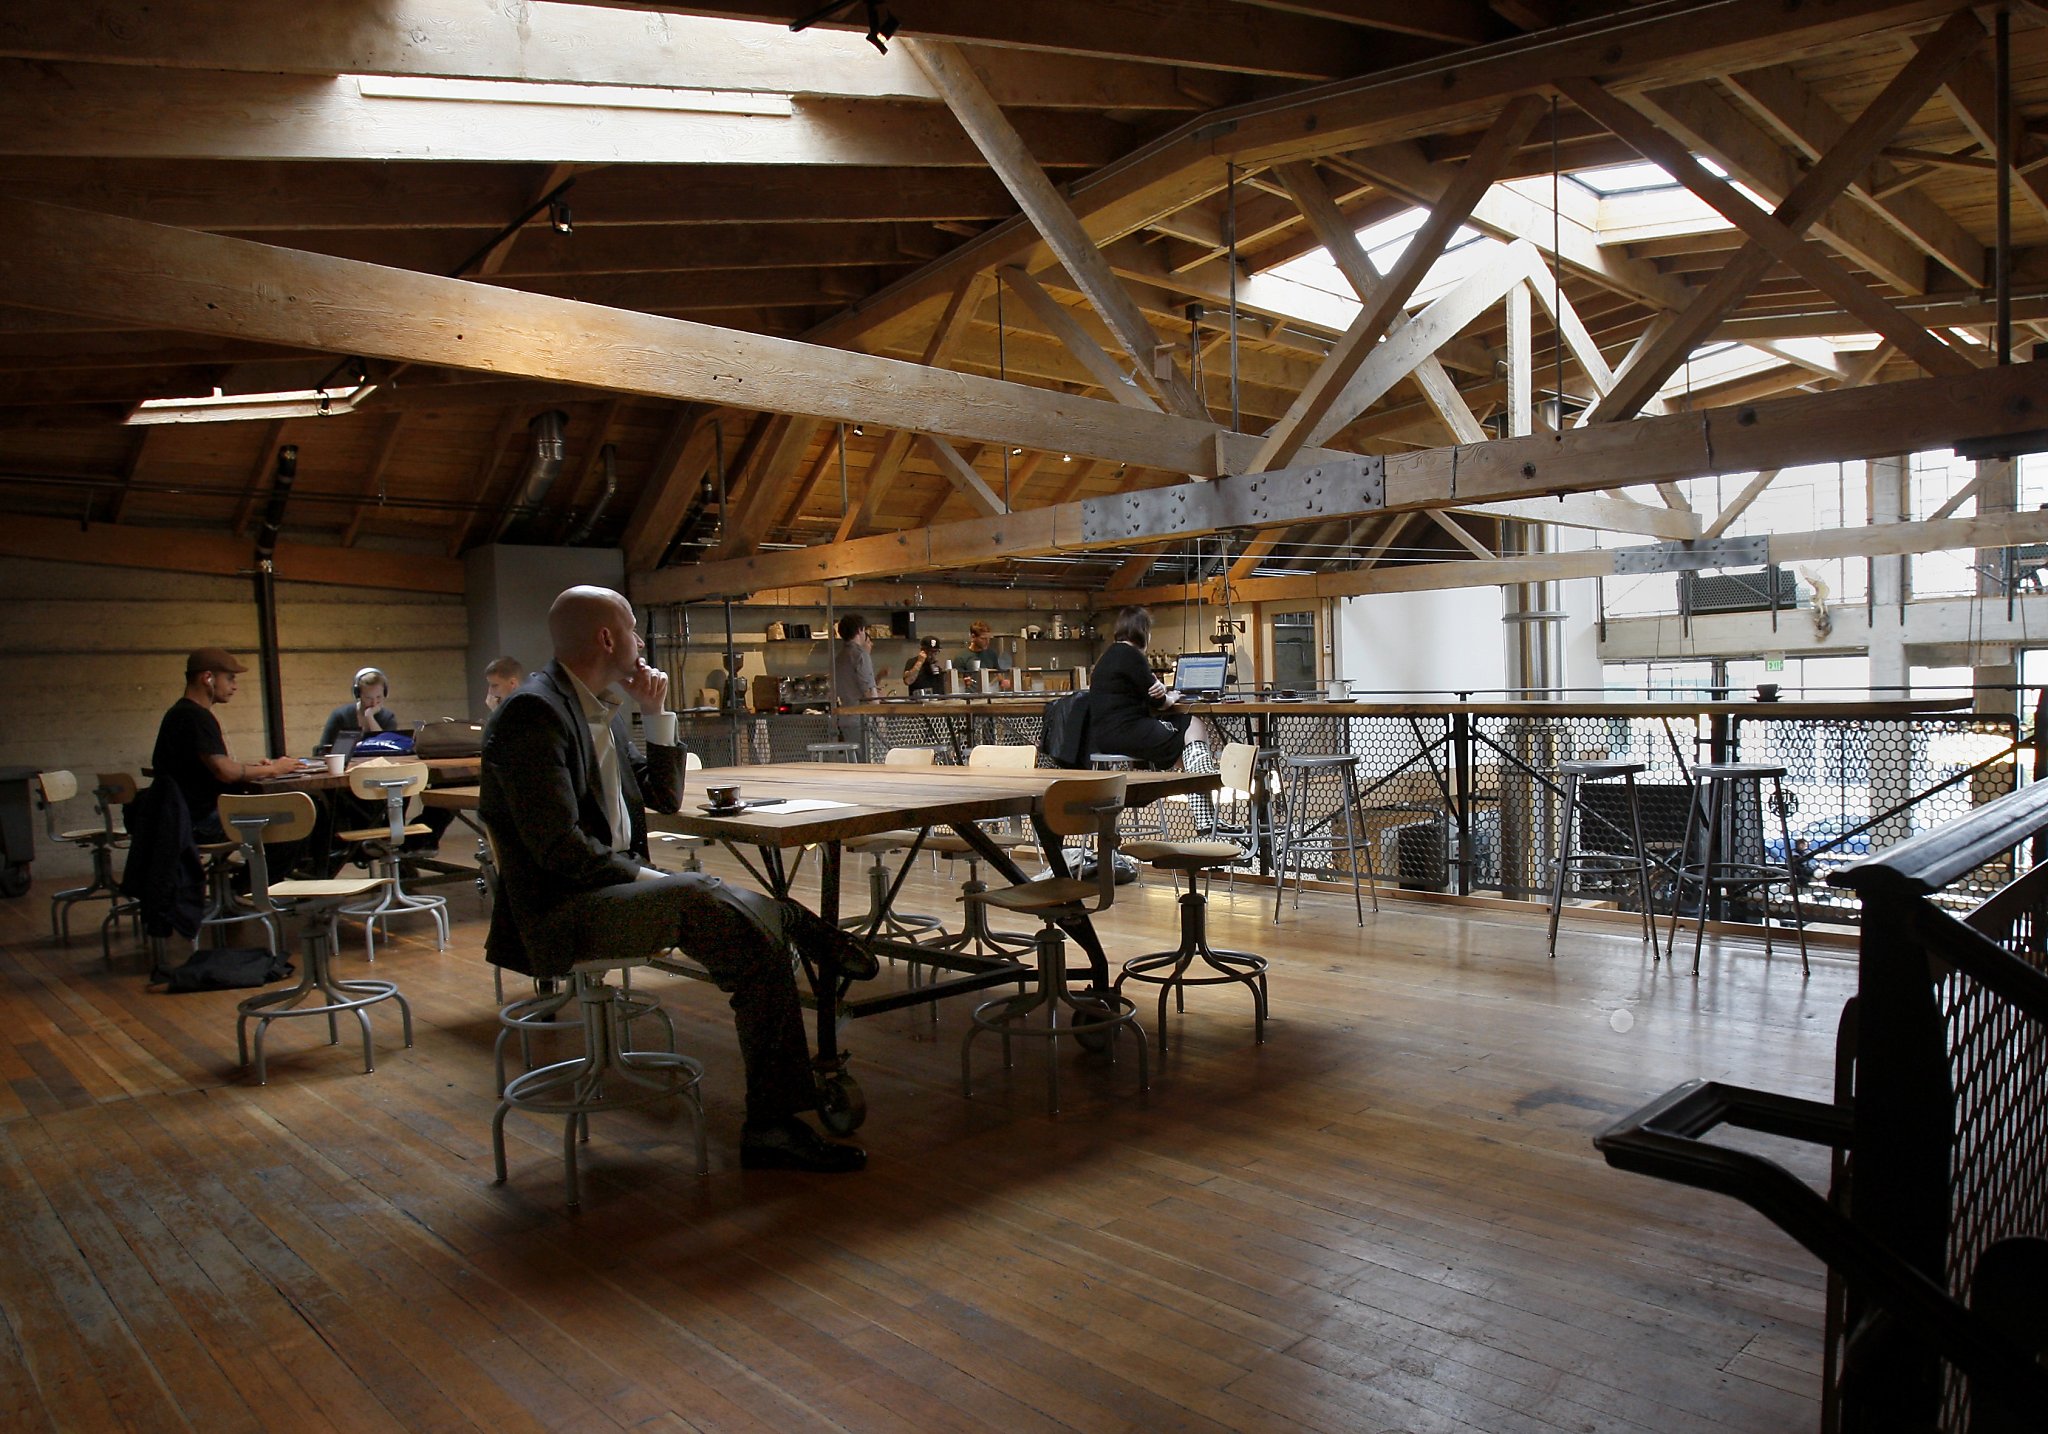 Sightglass Coffee building a fine blend of old, new - SFGate2048 x 1434